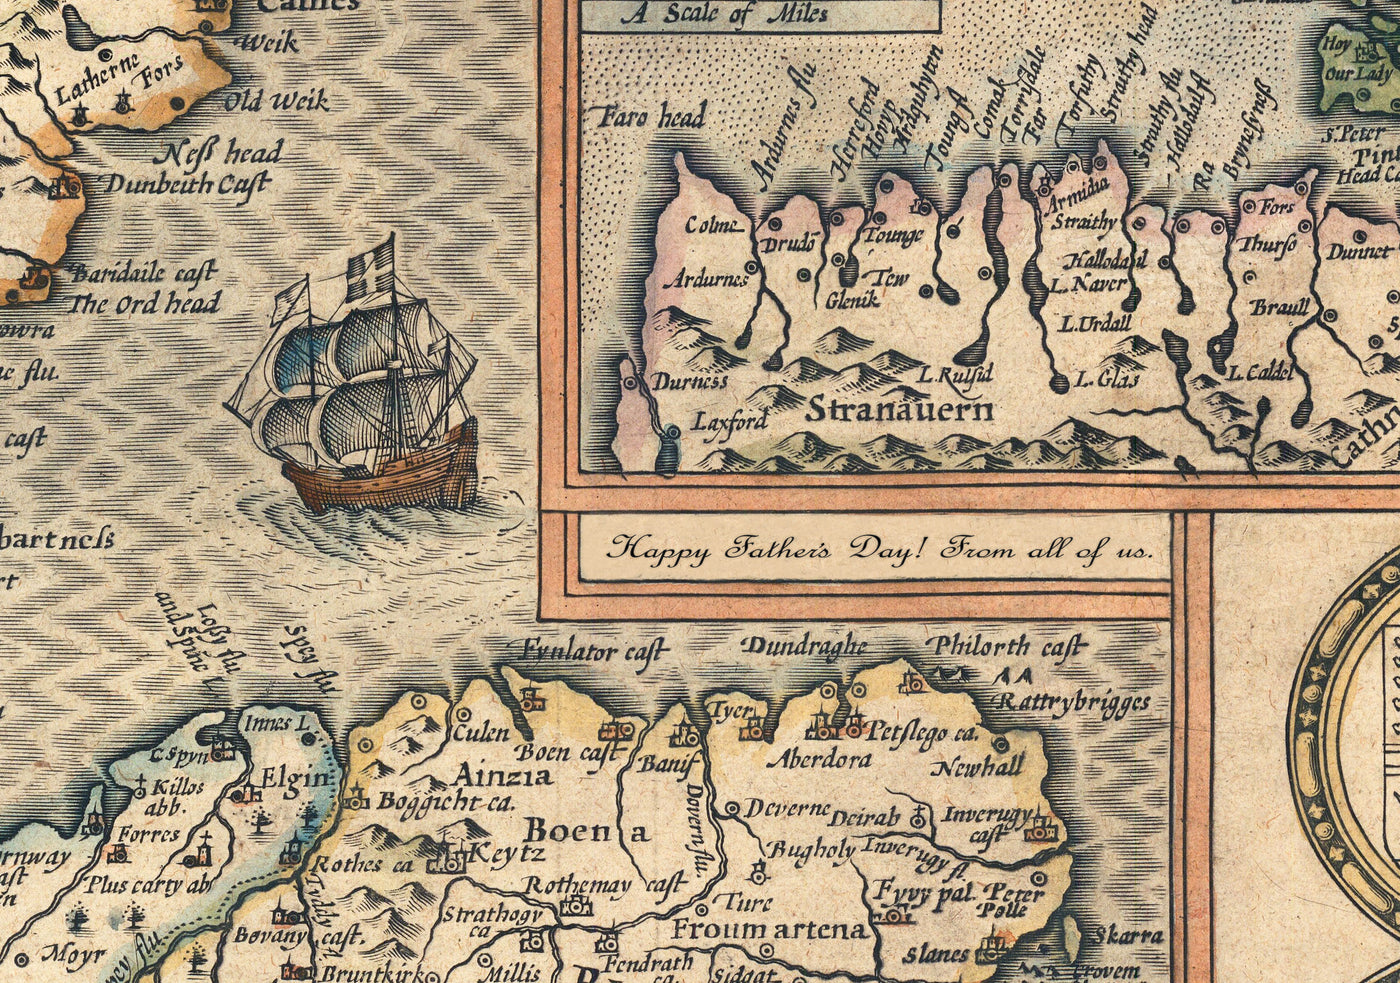 First Old Map of Central Wales in 1578 by Christopher Saxton - Powys, Ceredigion, Carmarthenshire, Aberystwyth, Cardigan